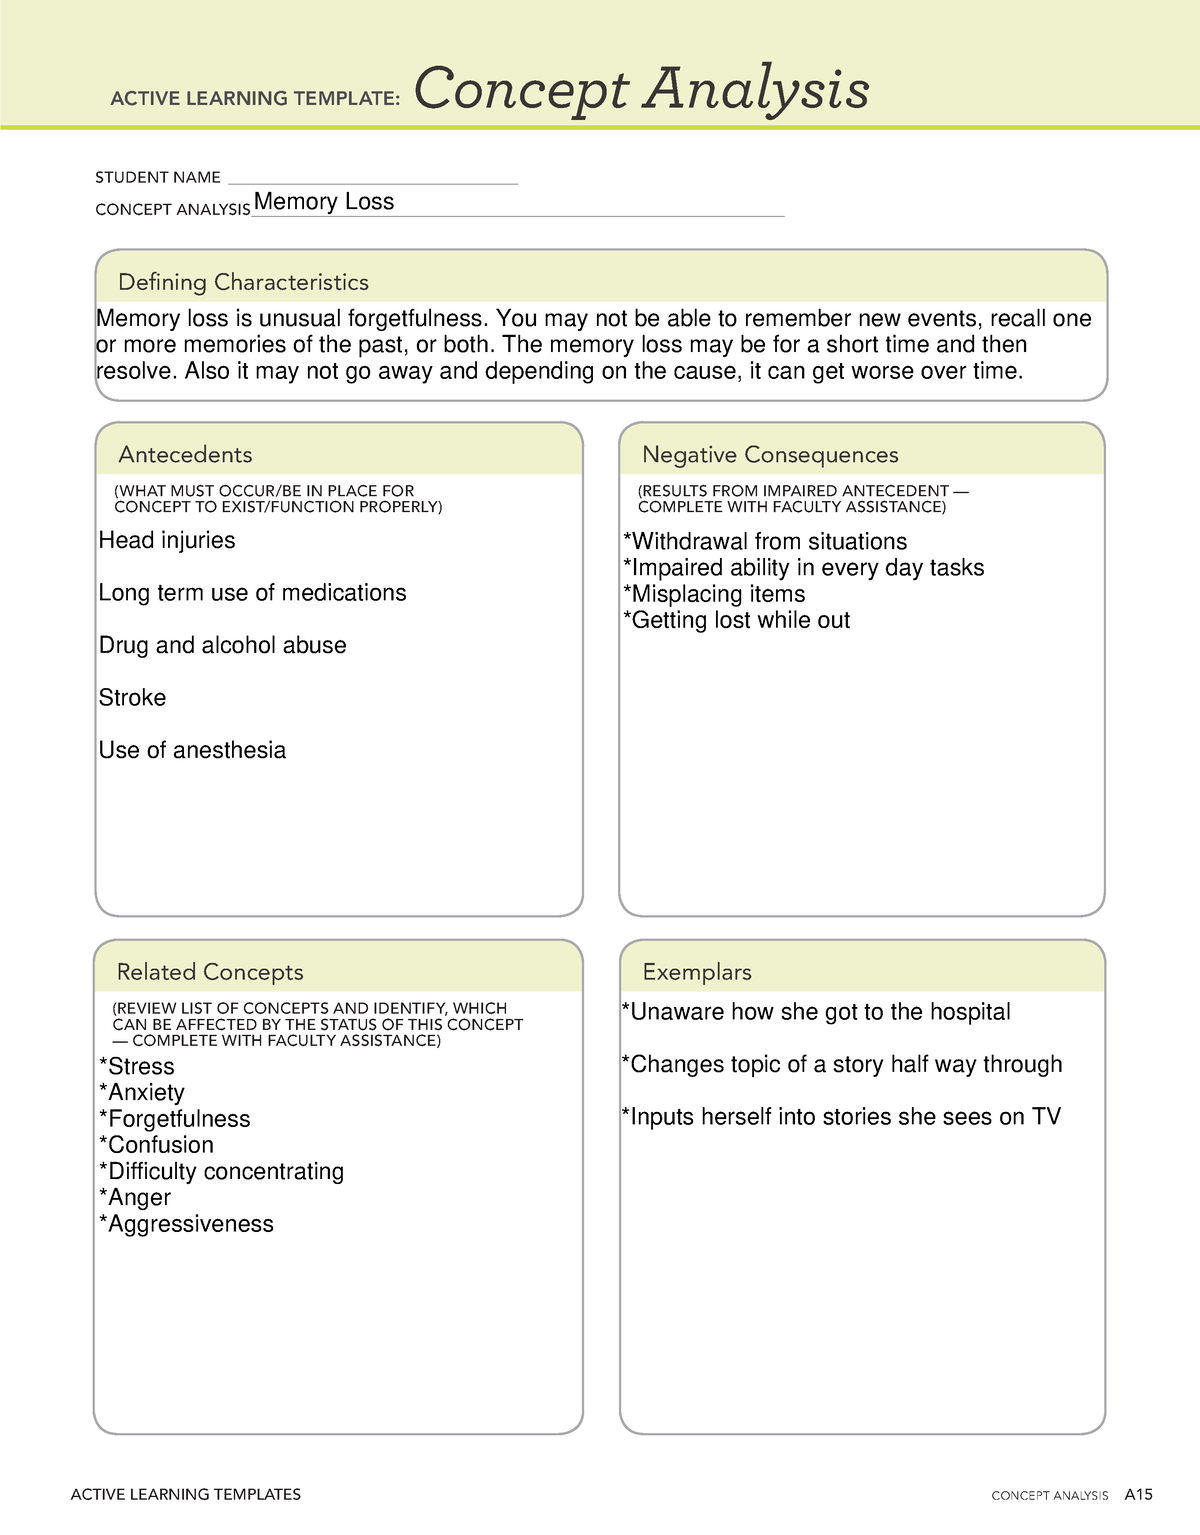 concept-analysis-4-active-learning-templates-concept-analysis-a